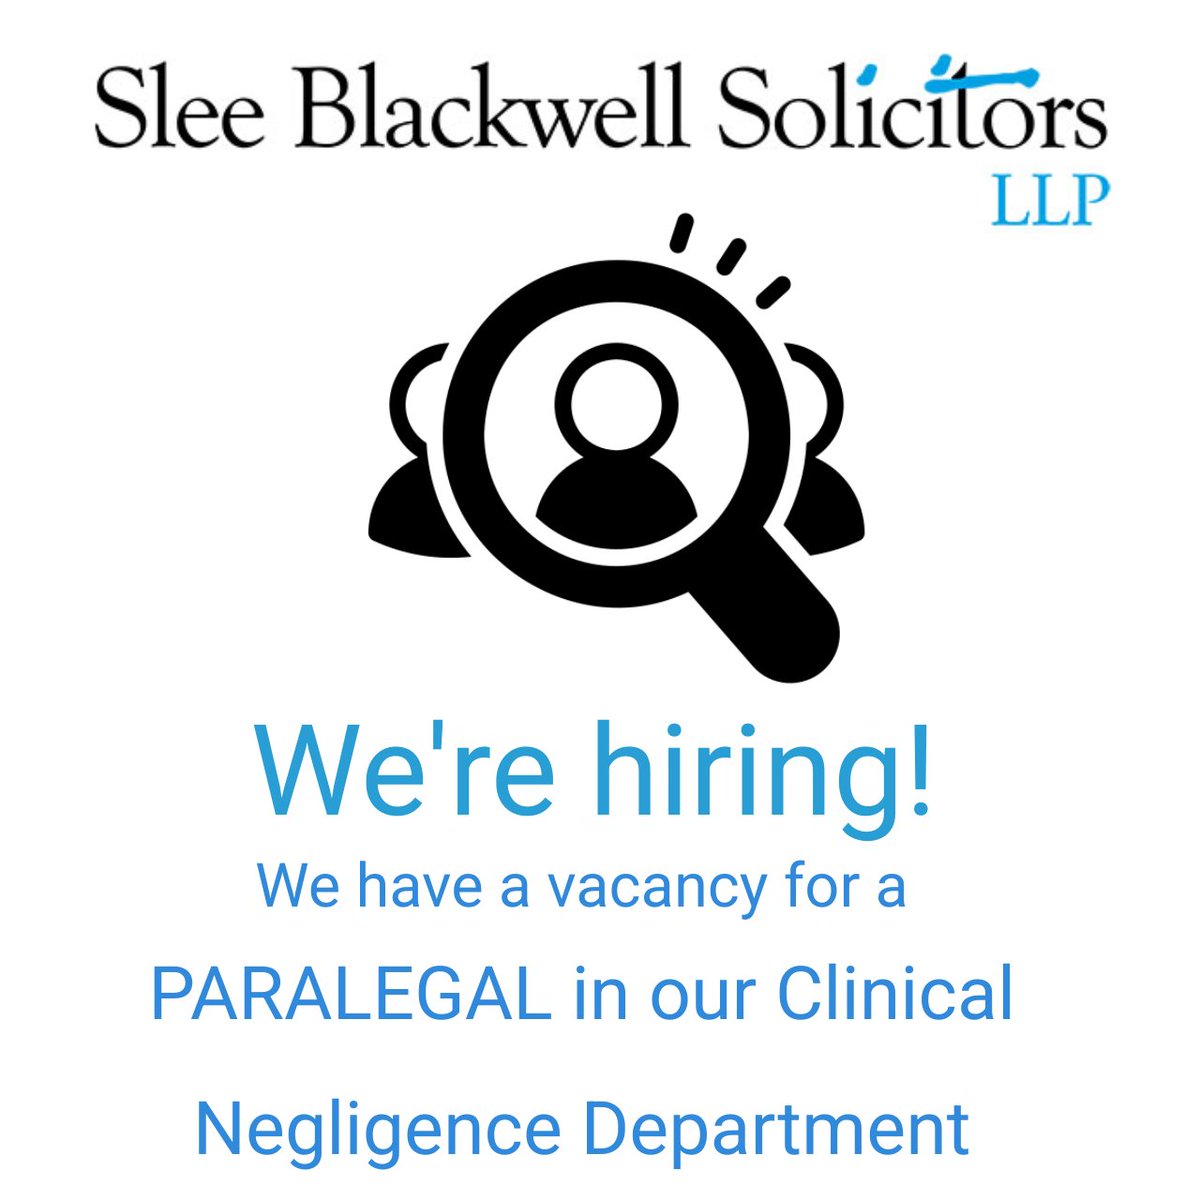 We also have an opportunity for a paralegal to join our Clinical Negligence Dept. Fantastic for someone launching their career. Based in #Taunton or #Barnstaple working with @CarolineWebberB & @Oliver_Thorne1 
CV & cover letter to oliver.thorne@sleeblackwell.co.uk to apply